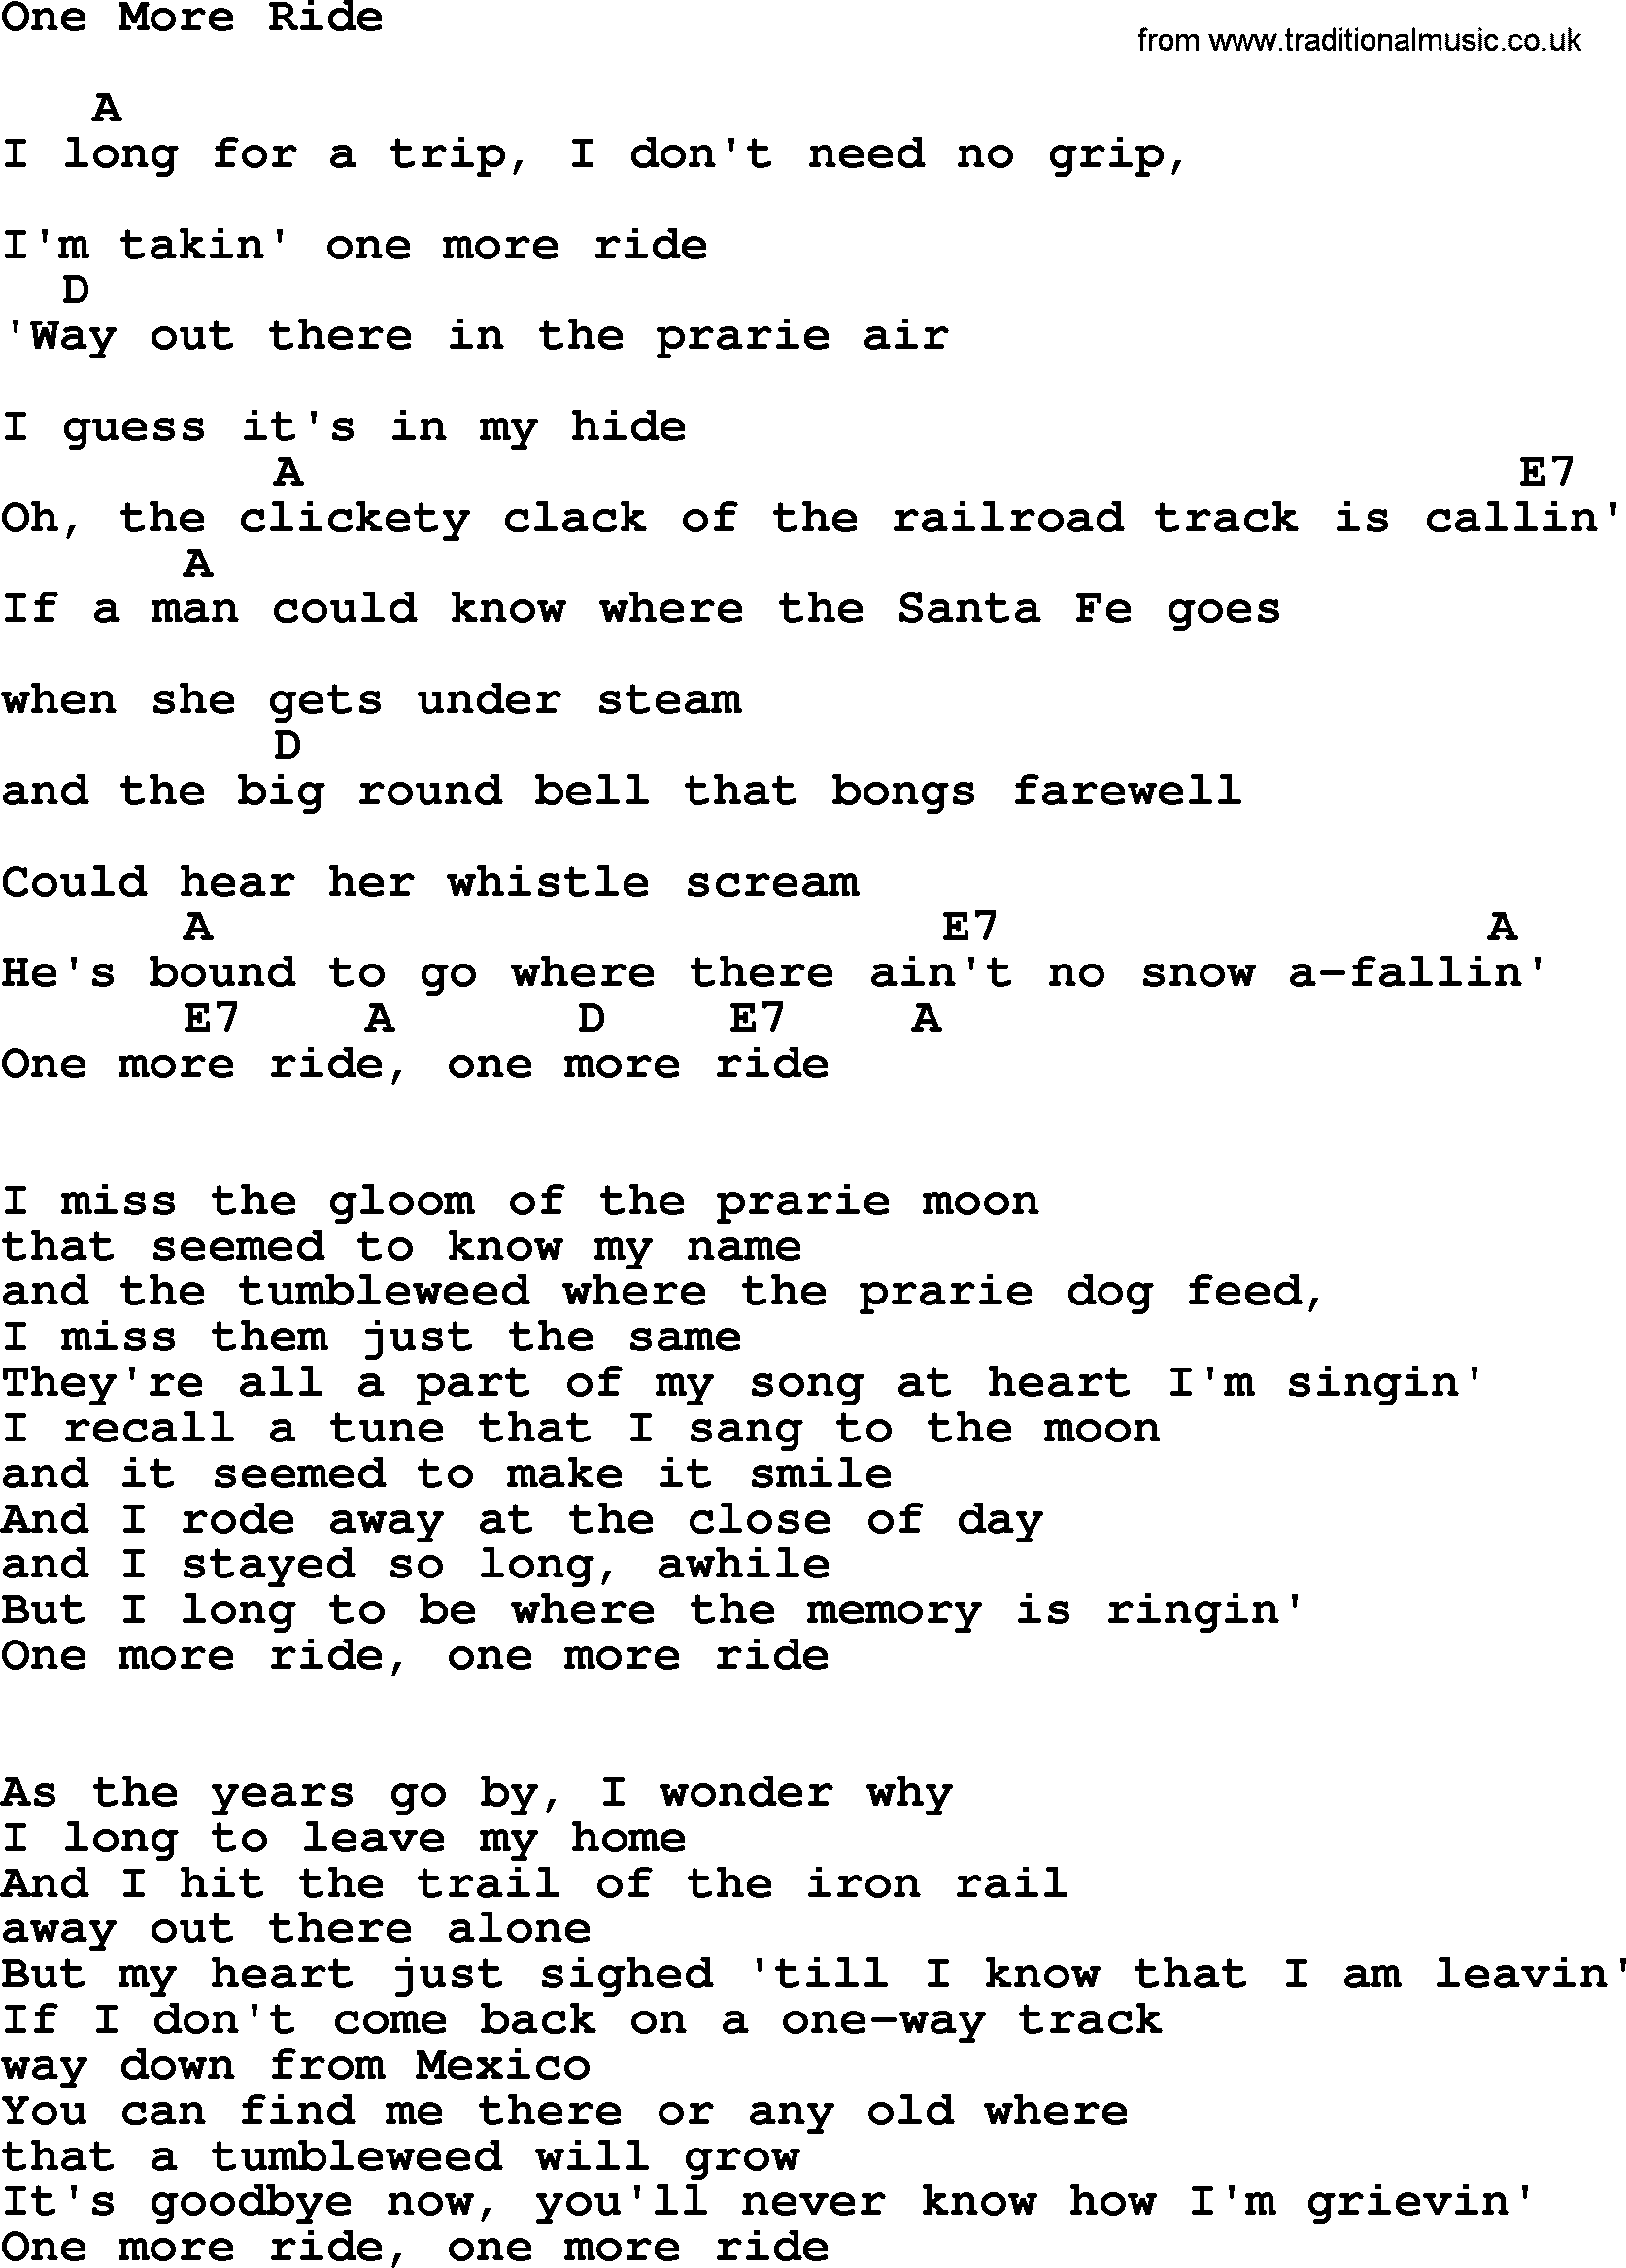 Johnny Cash song One More Ride, lyrics and chords